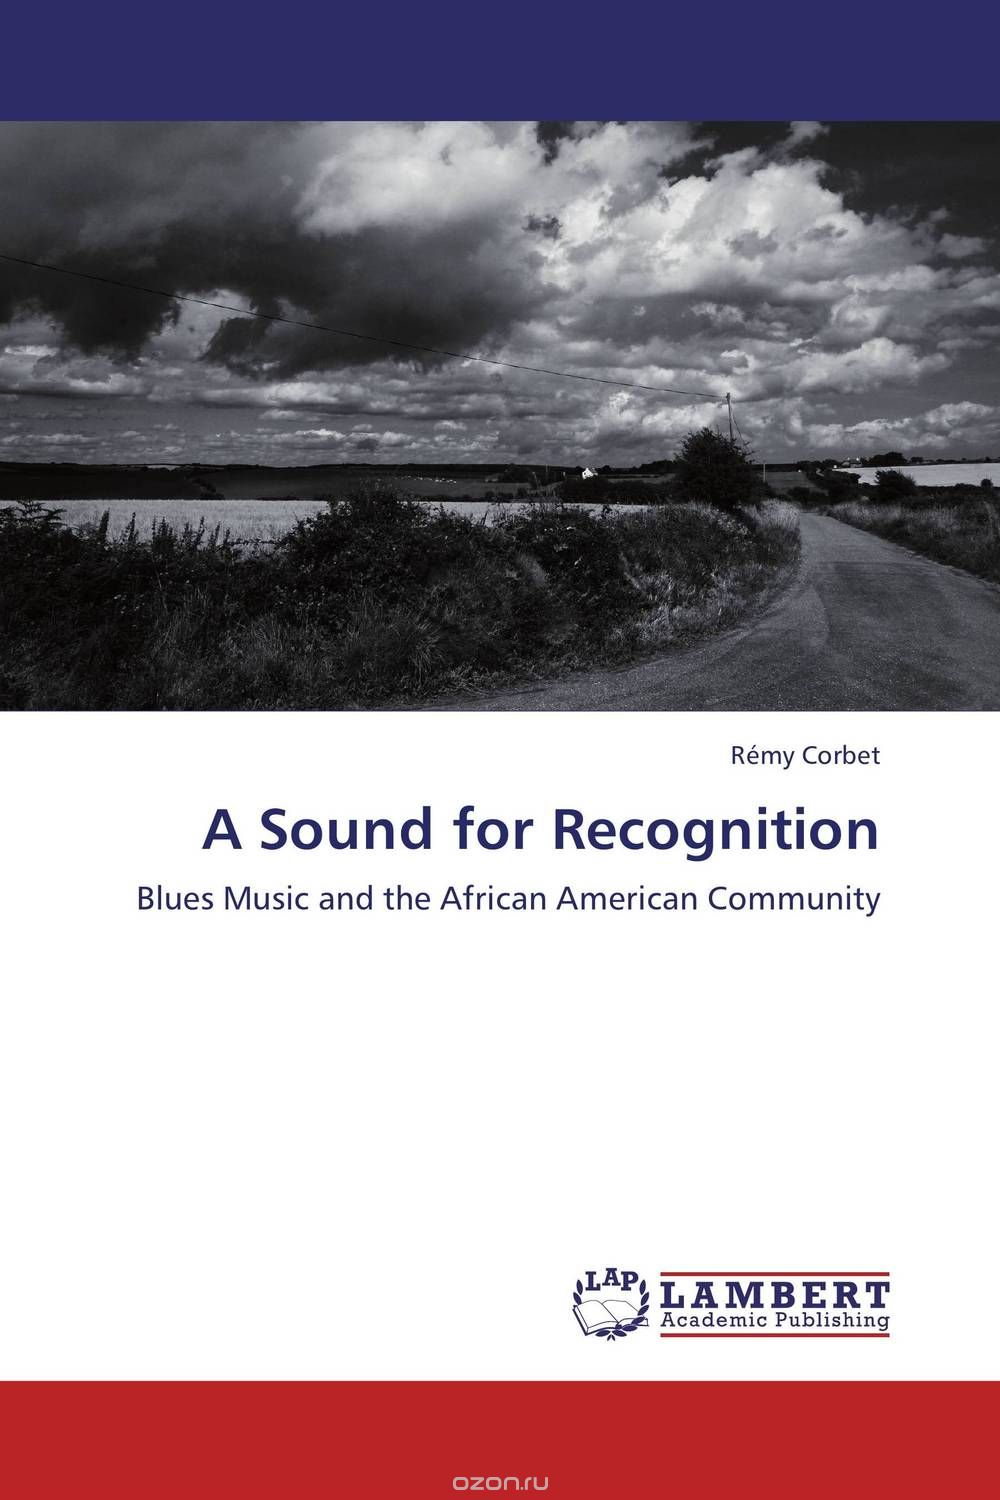 A Sound for Recognition